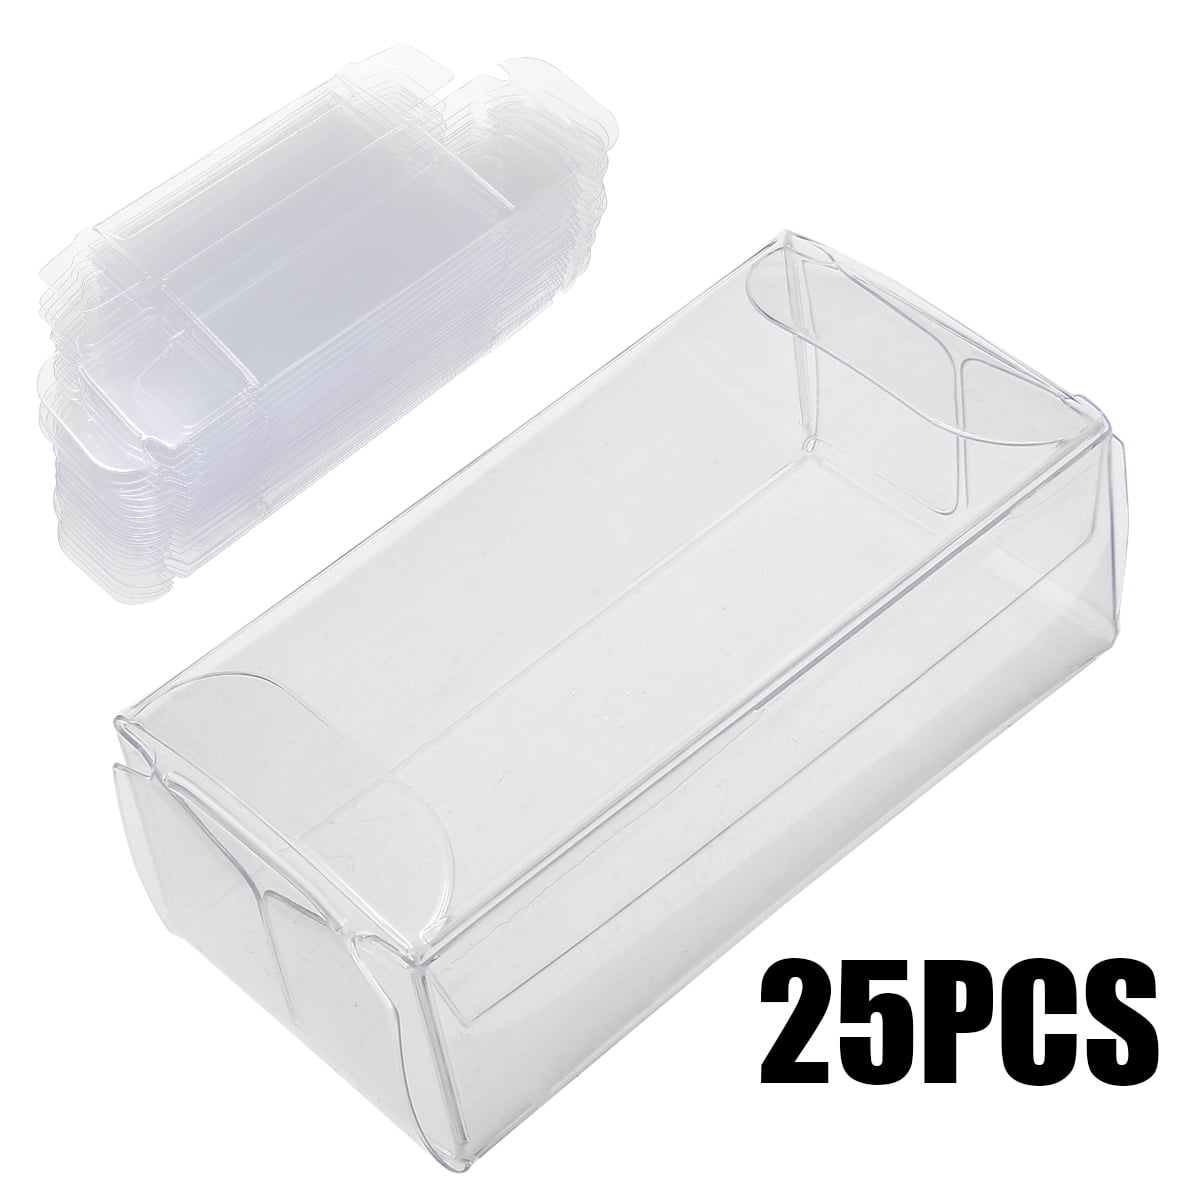 25pcs Clear Plastic PVC Display Box Protector For Model Toy Car Gift Candy 